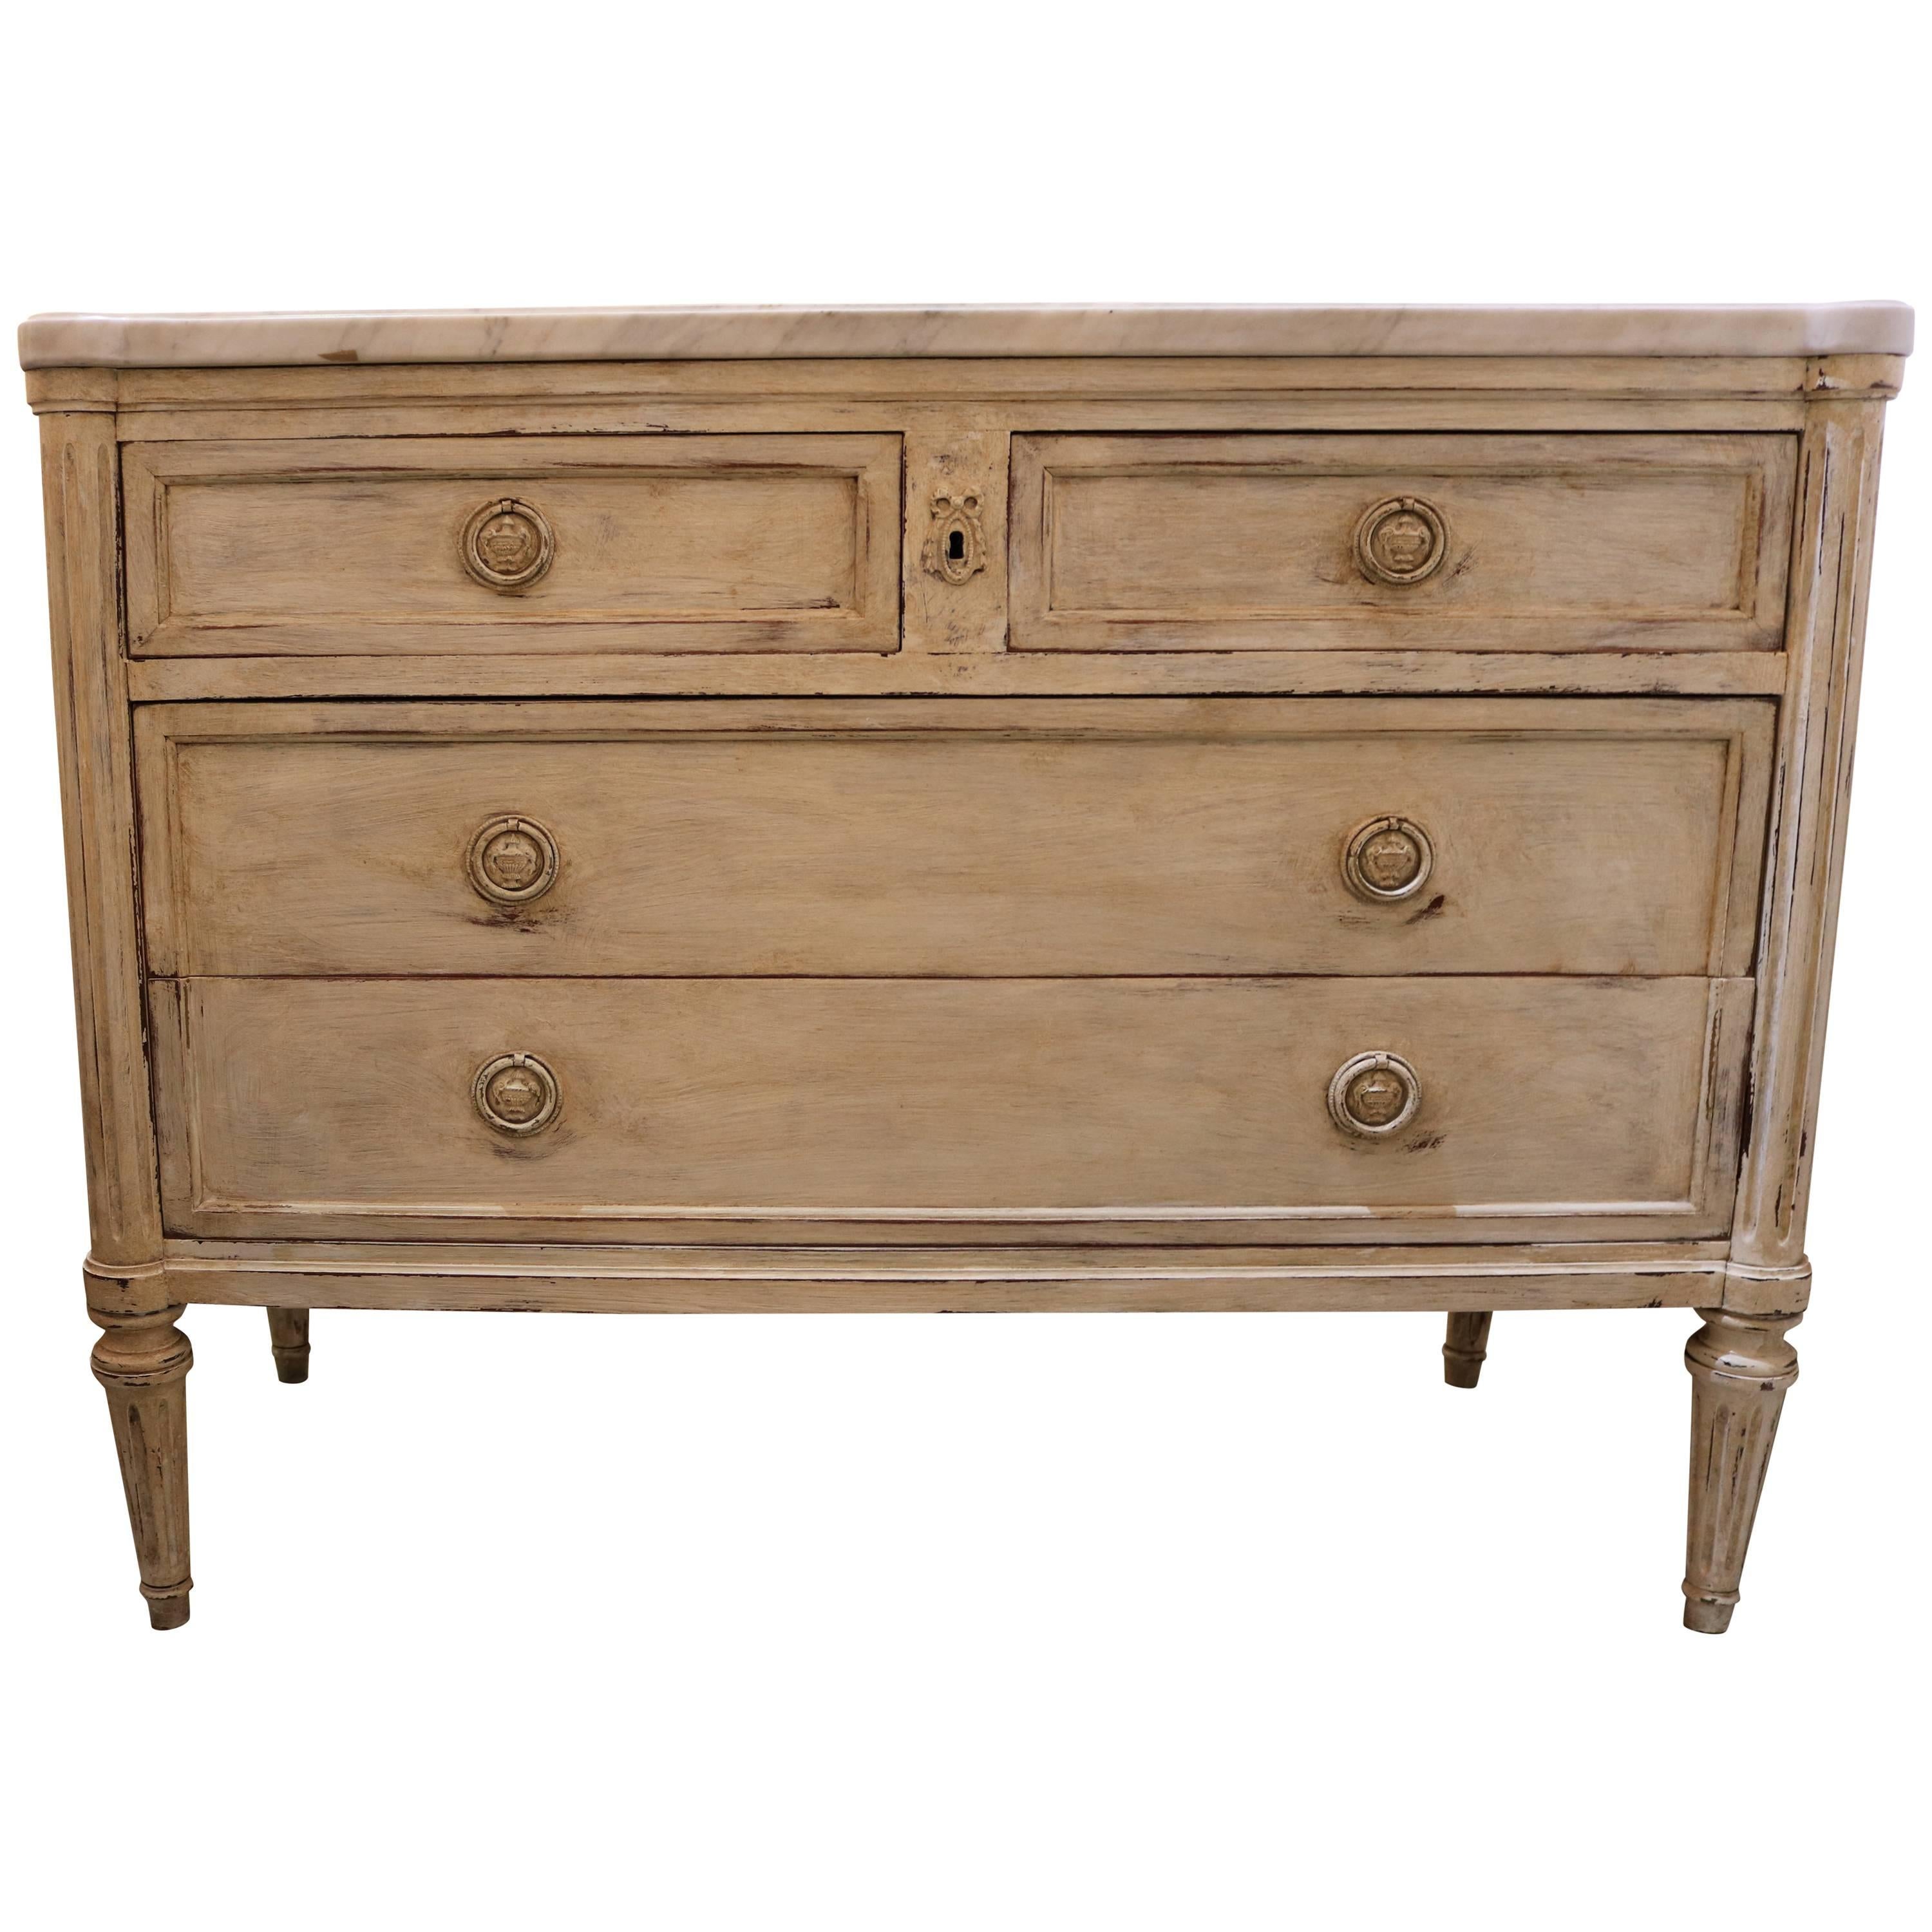 Louis XVI Style Painted Commode with Marble Top